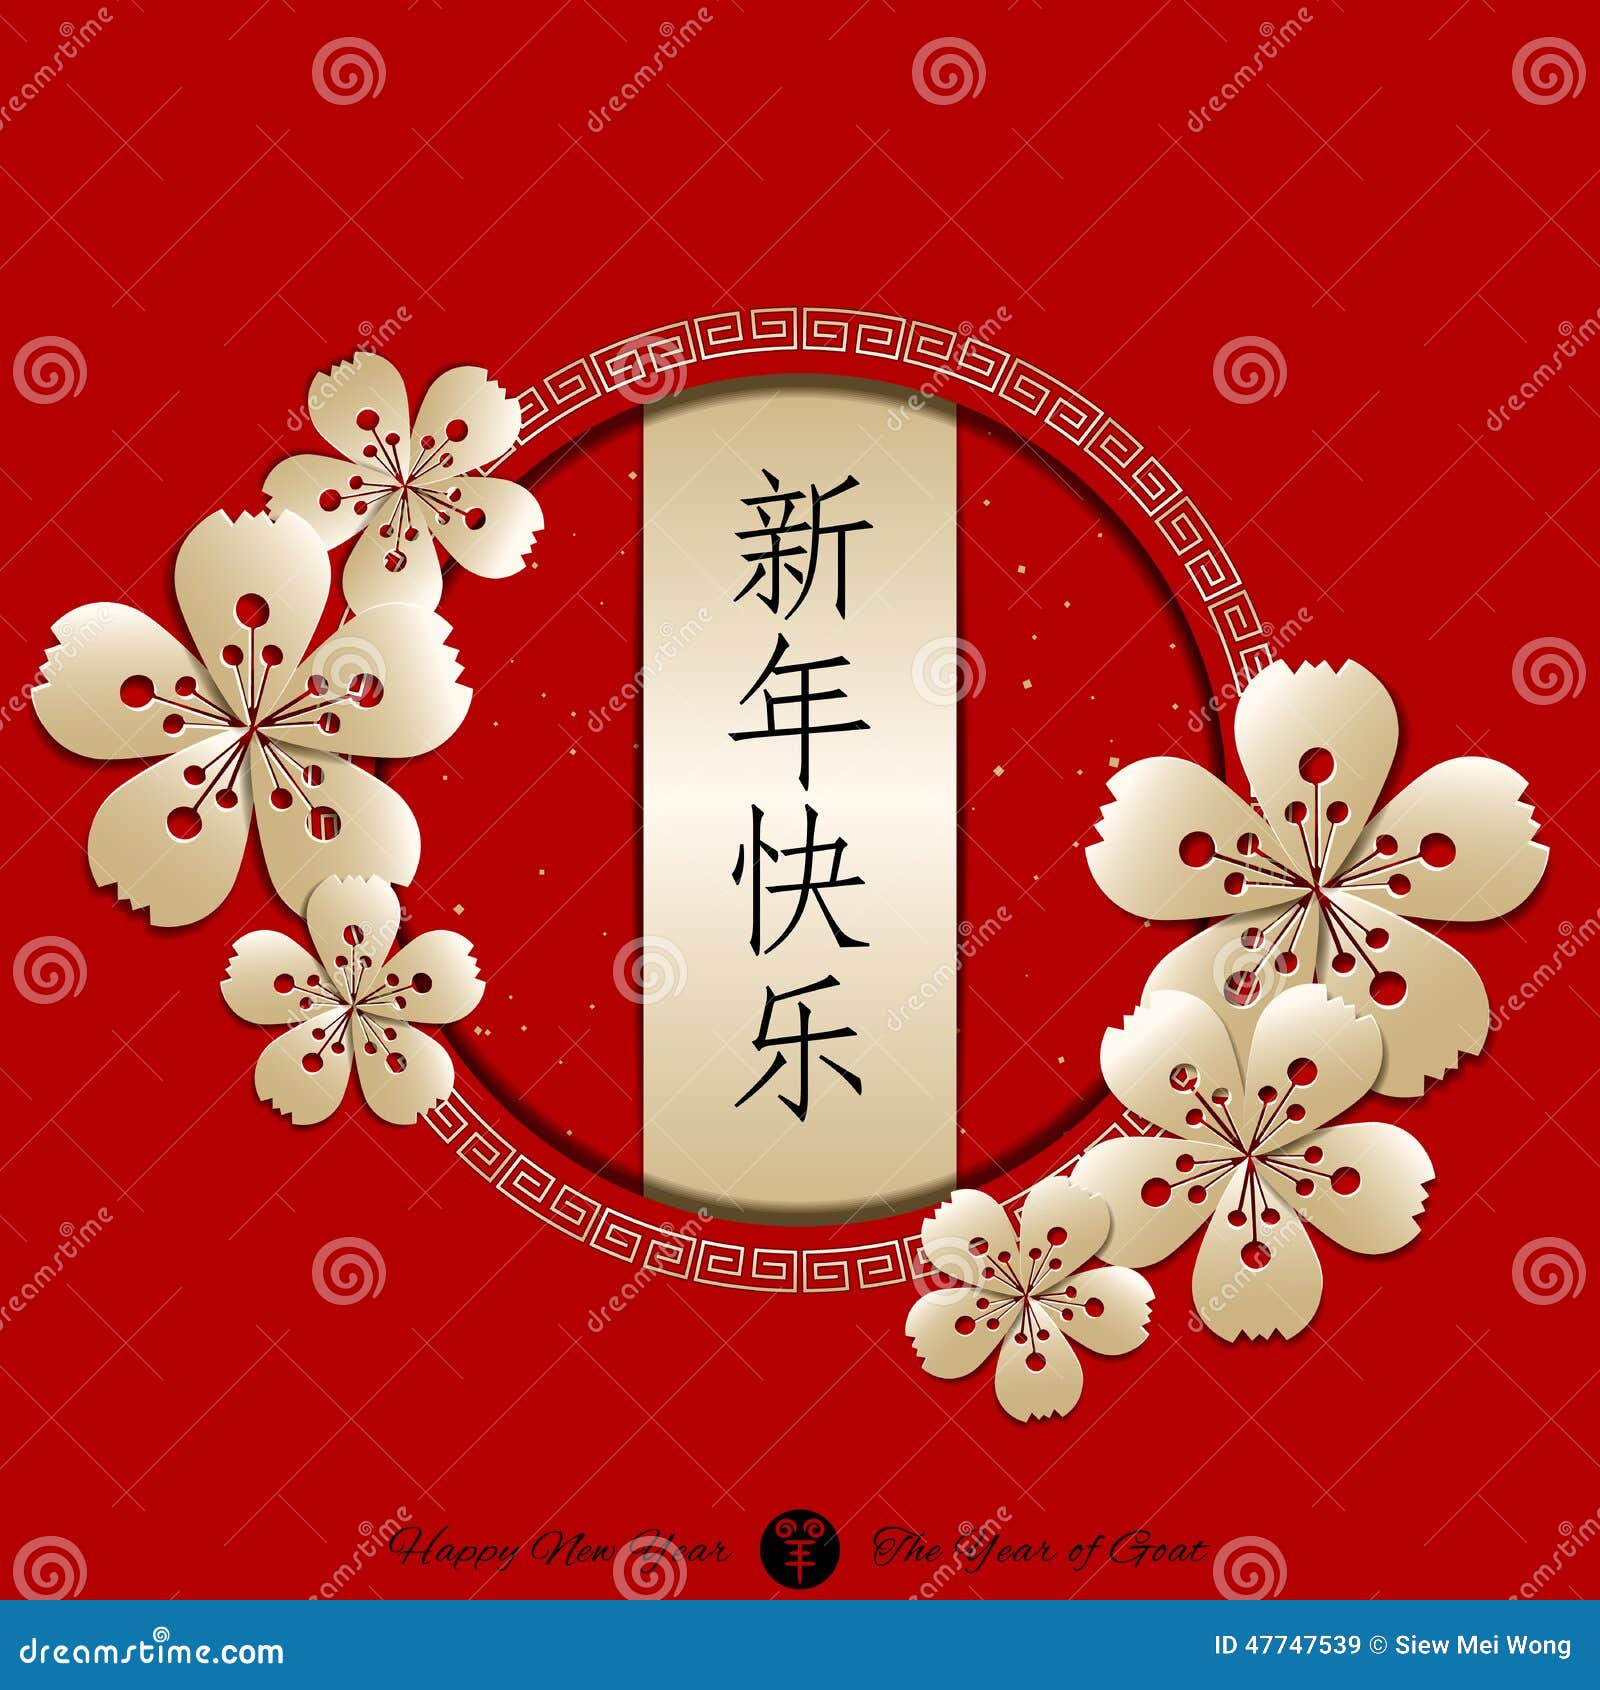 Chinese New Year Background Stock Vector - Illustration of ...